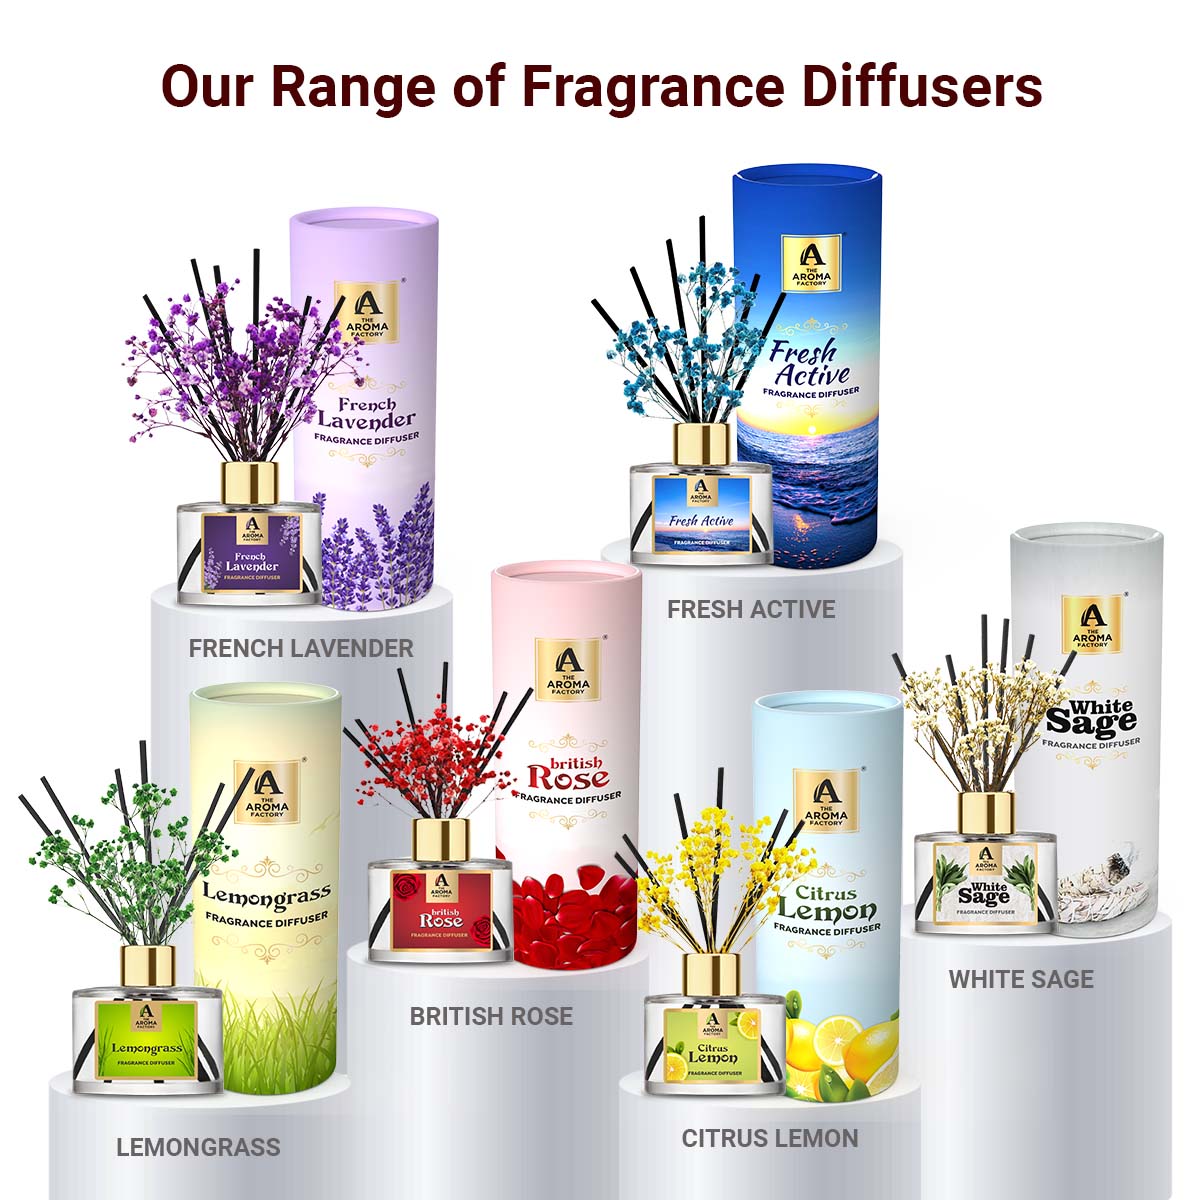 The Aroma Factory Prospective Bride to Be/Engaged Gift with Card, French Lavender Fragrance Reed Diffuser Set (1 Box &1 Card)